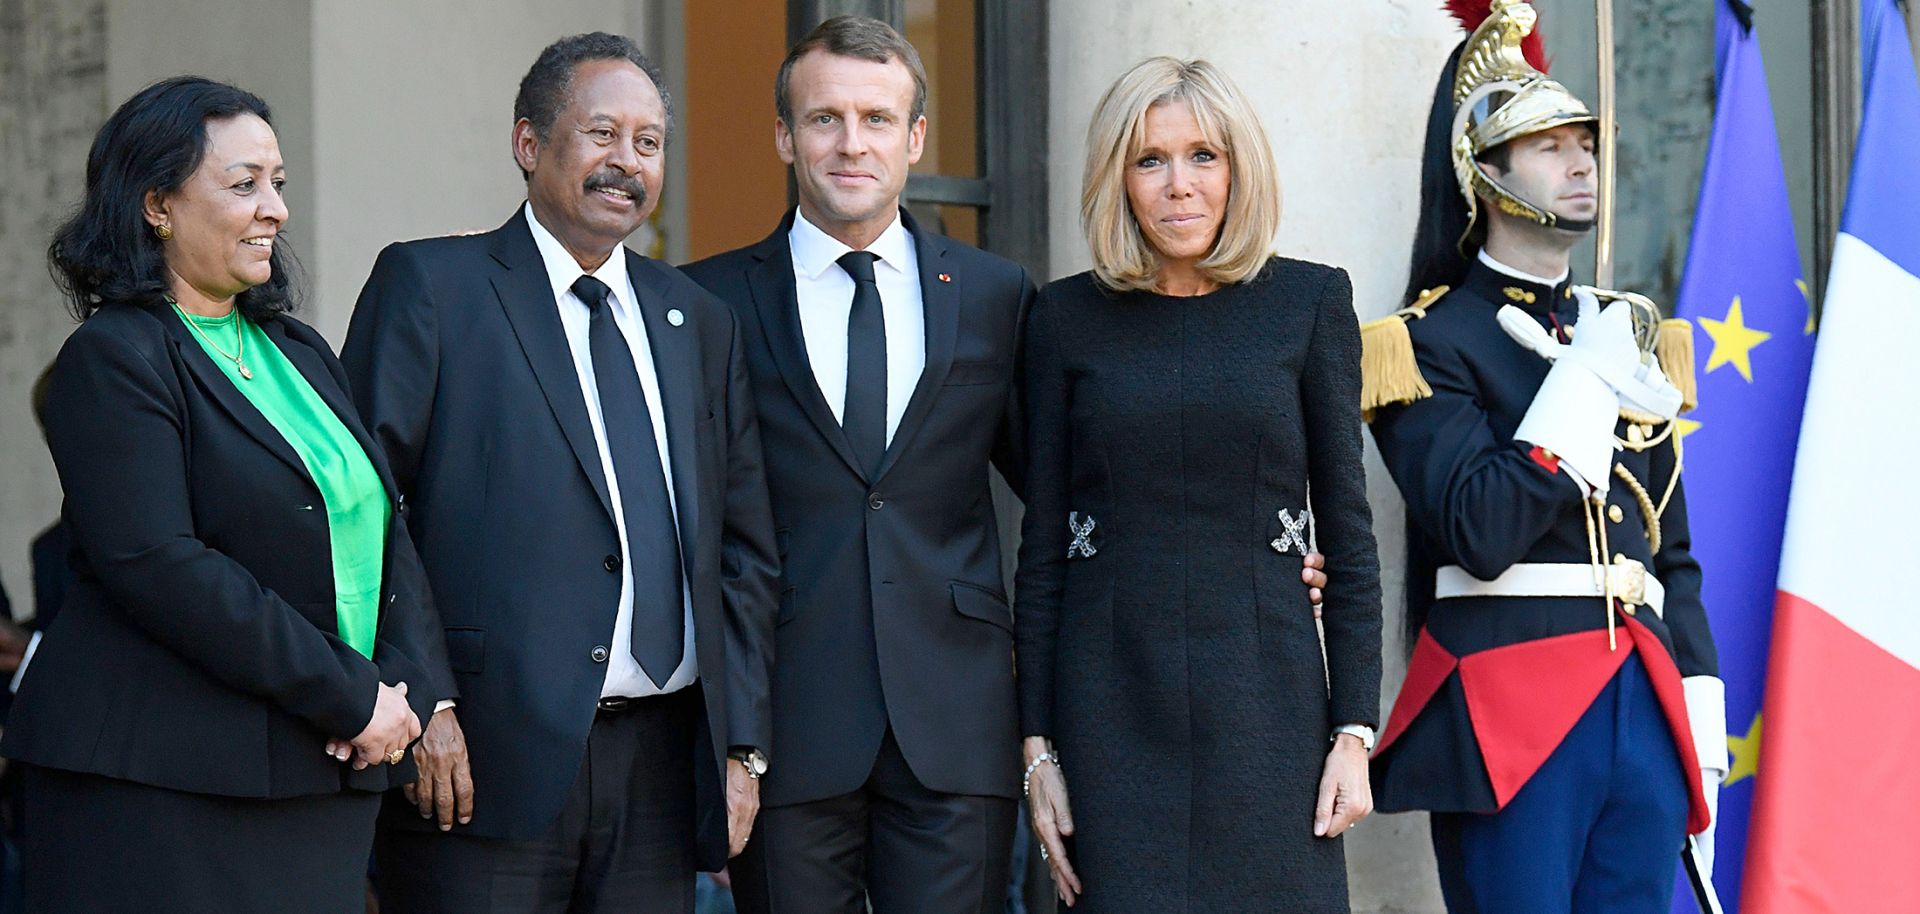 Sudanese Prime Minister Abdalla Hamdok (2L) is joined by his wife (L), economist Muna Abdalla, and French President Emmanuel Macron (C) and his spouse, Brigitte Macron (2R) in Paris on Sept. 30, 2019.